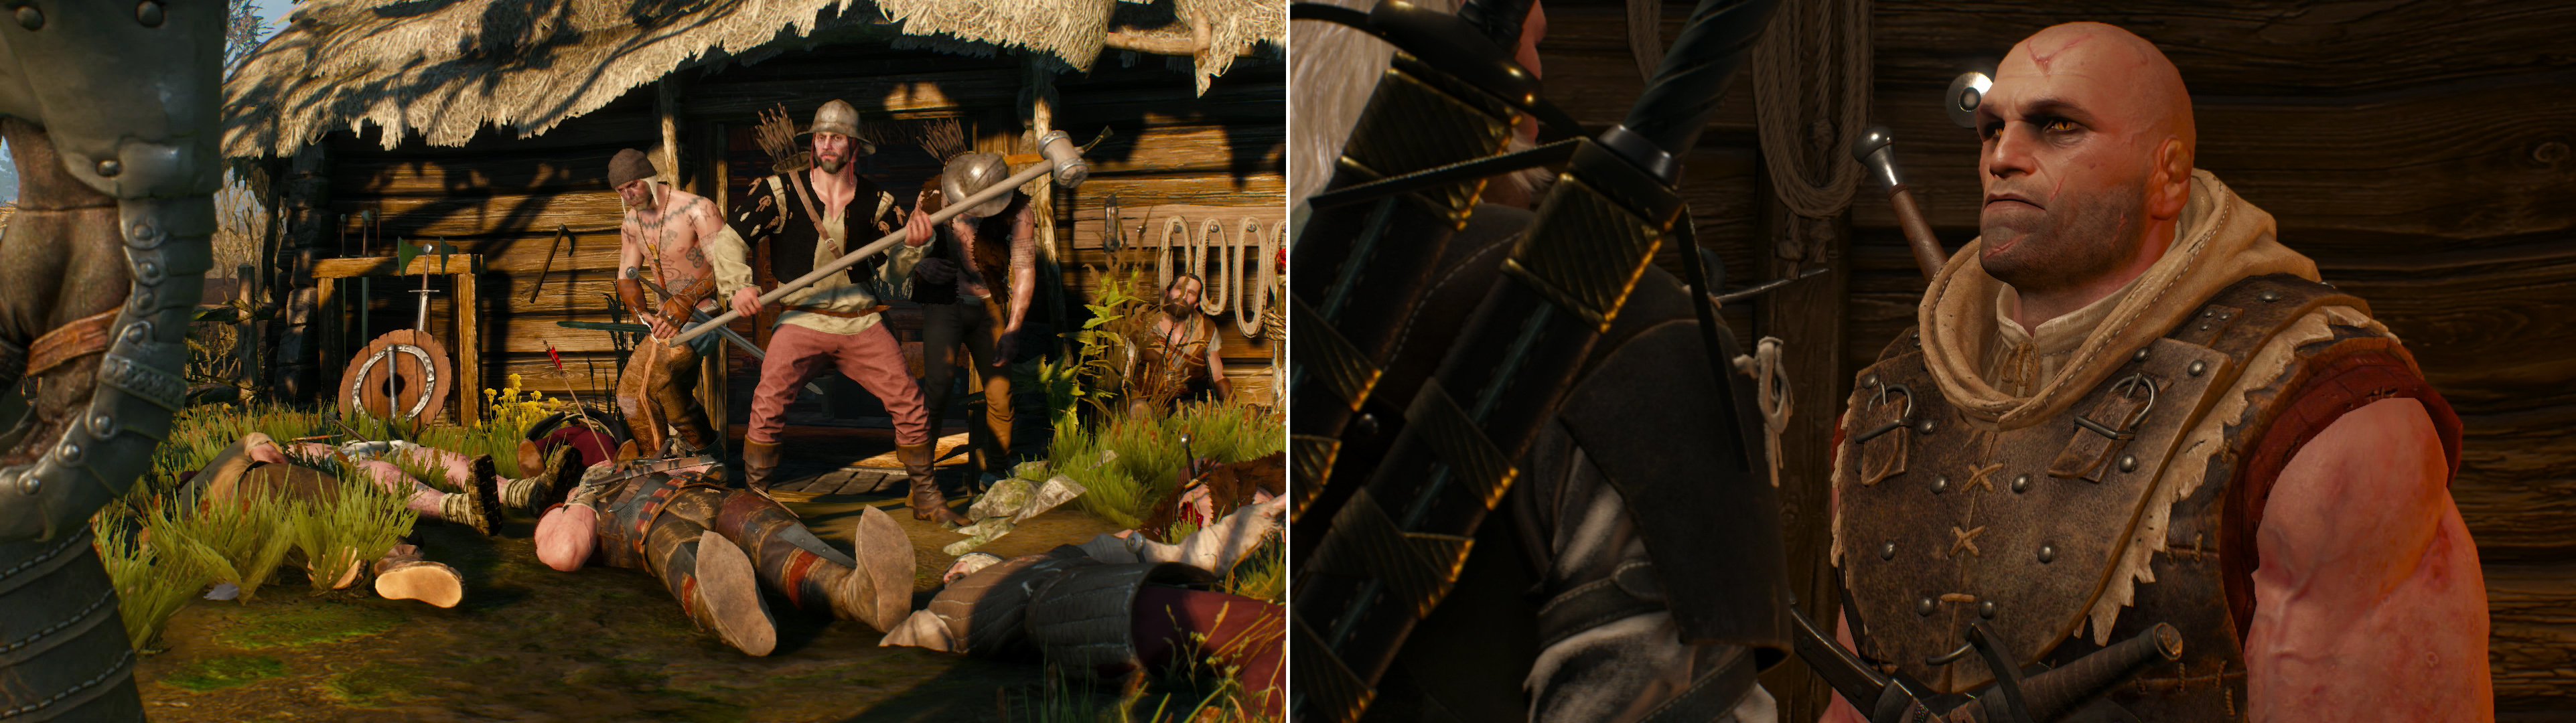 Letho’s confrontation with his hunters doesn’t seem to go well for the Witcher (left). If you avoid conflict as Letho directed, you’ll be able to ask him to lay low at Kaer Morhen (right).